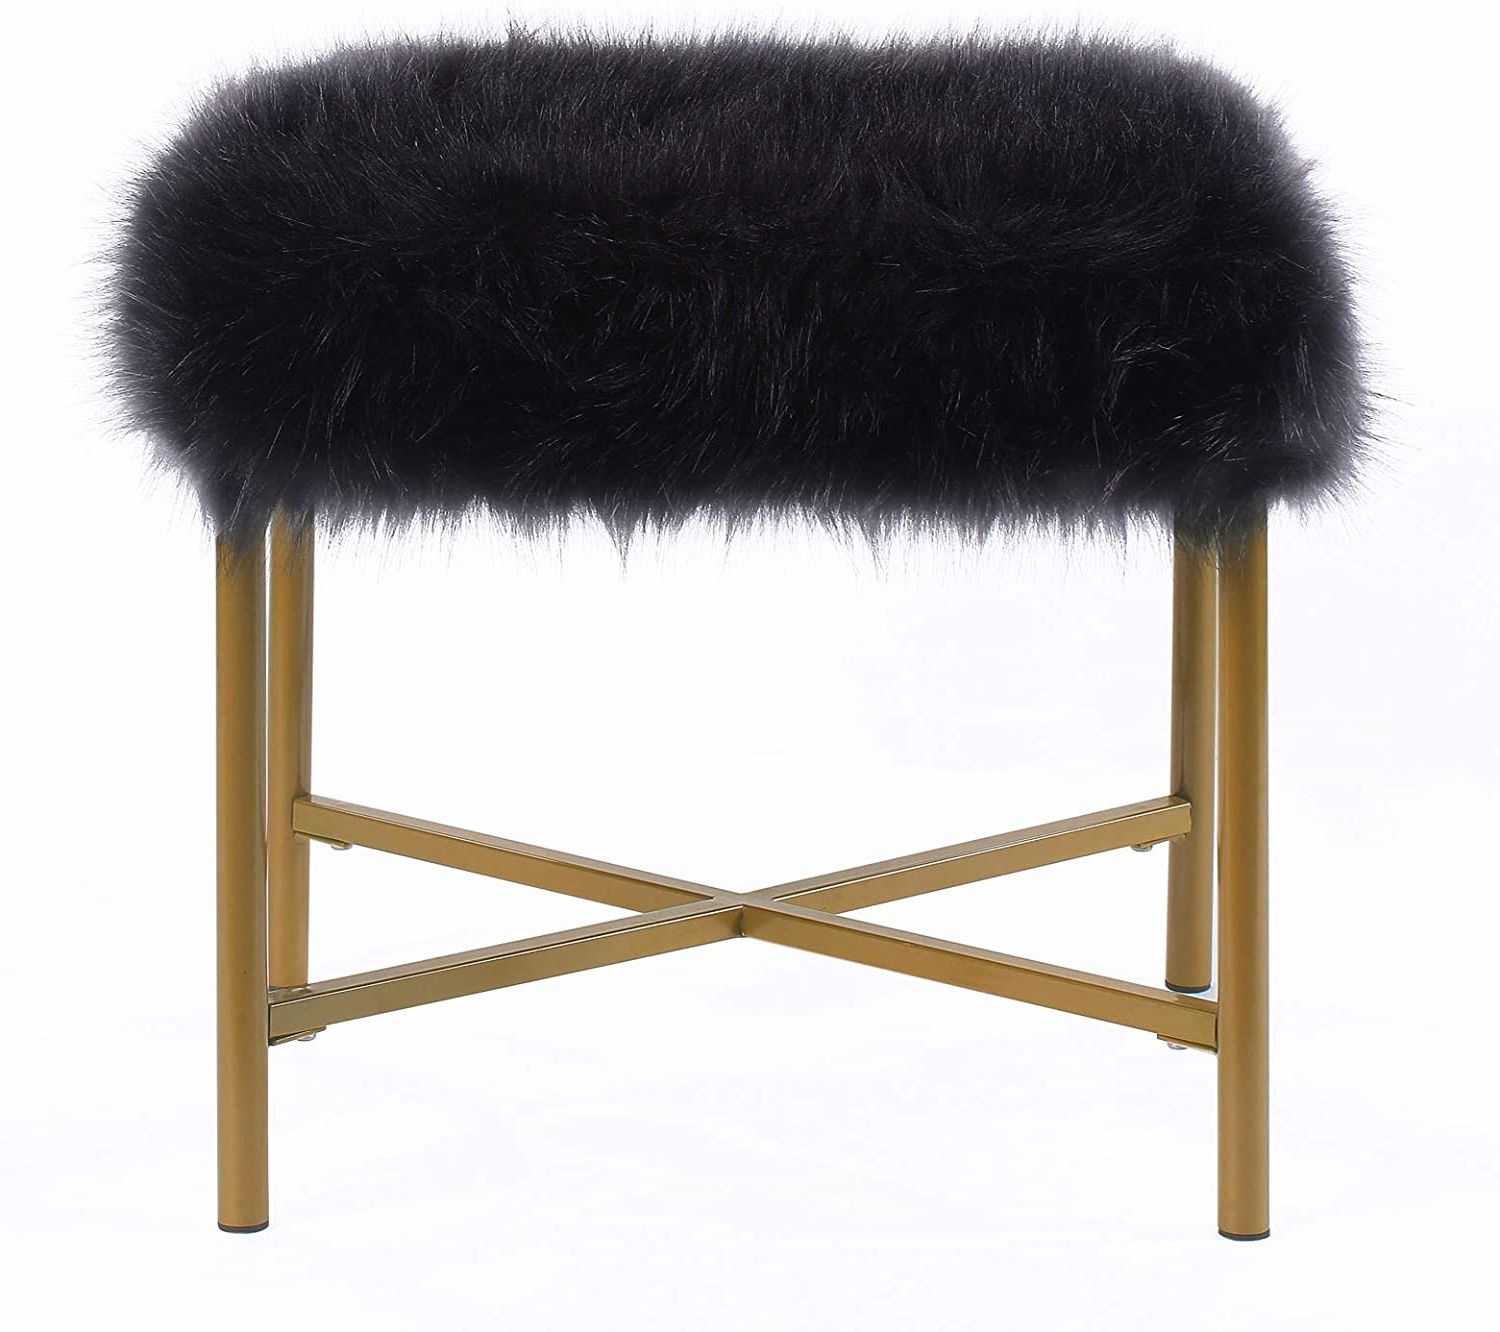 Benjara Square Faux Fur Upholstered Ottoman With Tubular Metal Legs And With Regard To Most Recent Charcoal Brown Faux Fur Square Ottomans (View 7 of 10)